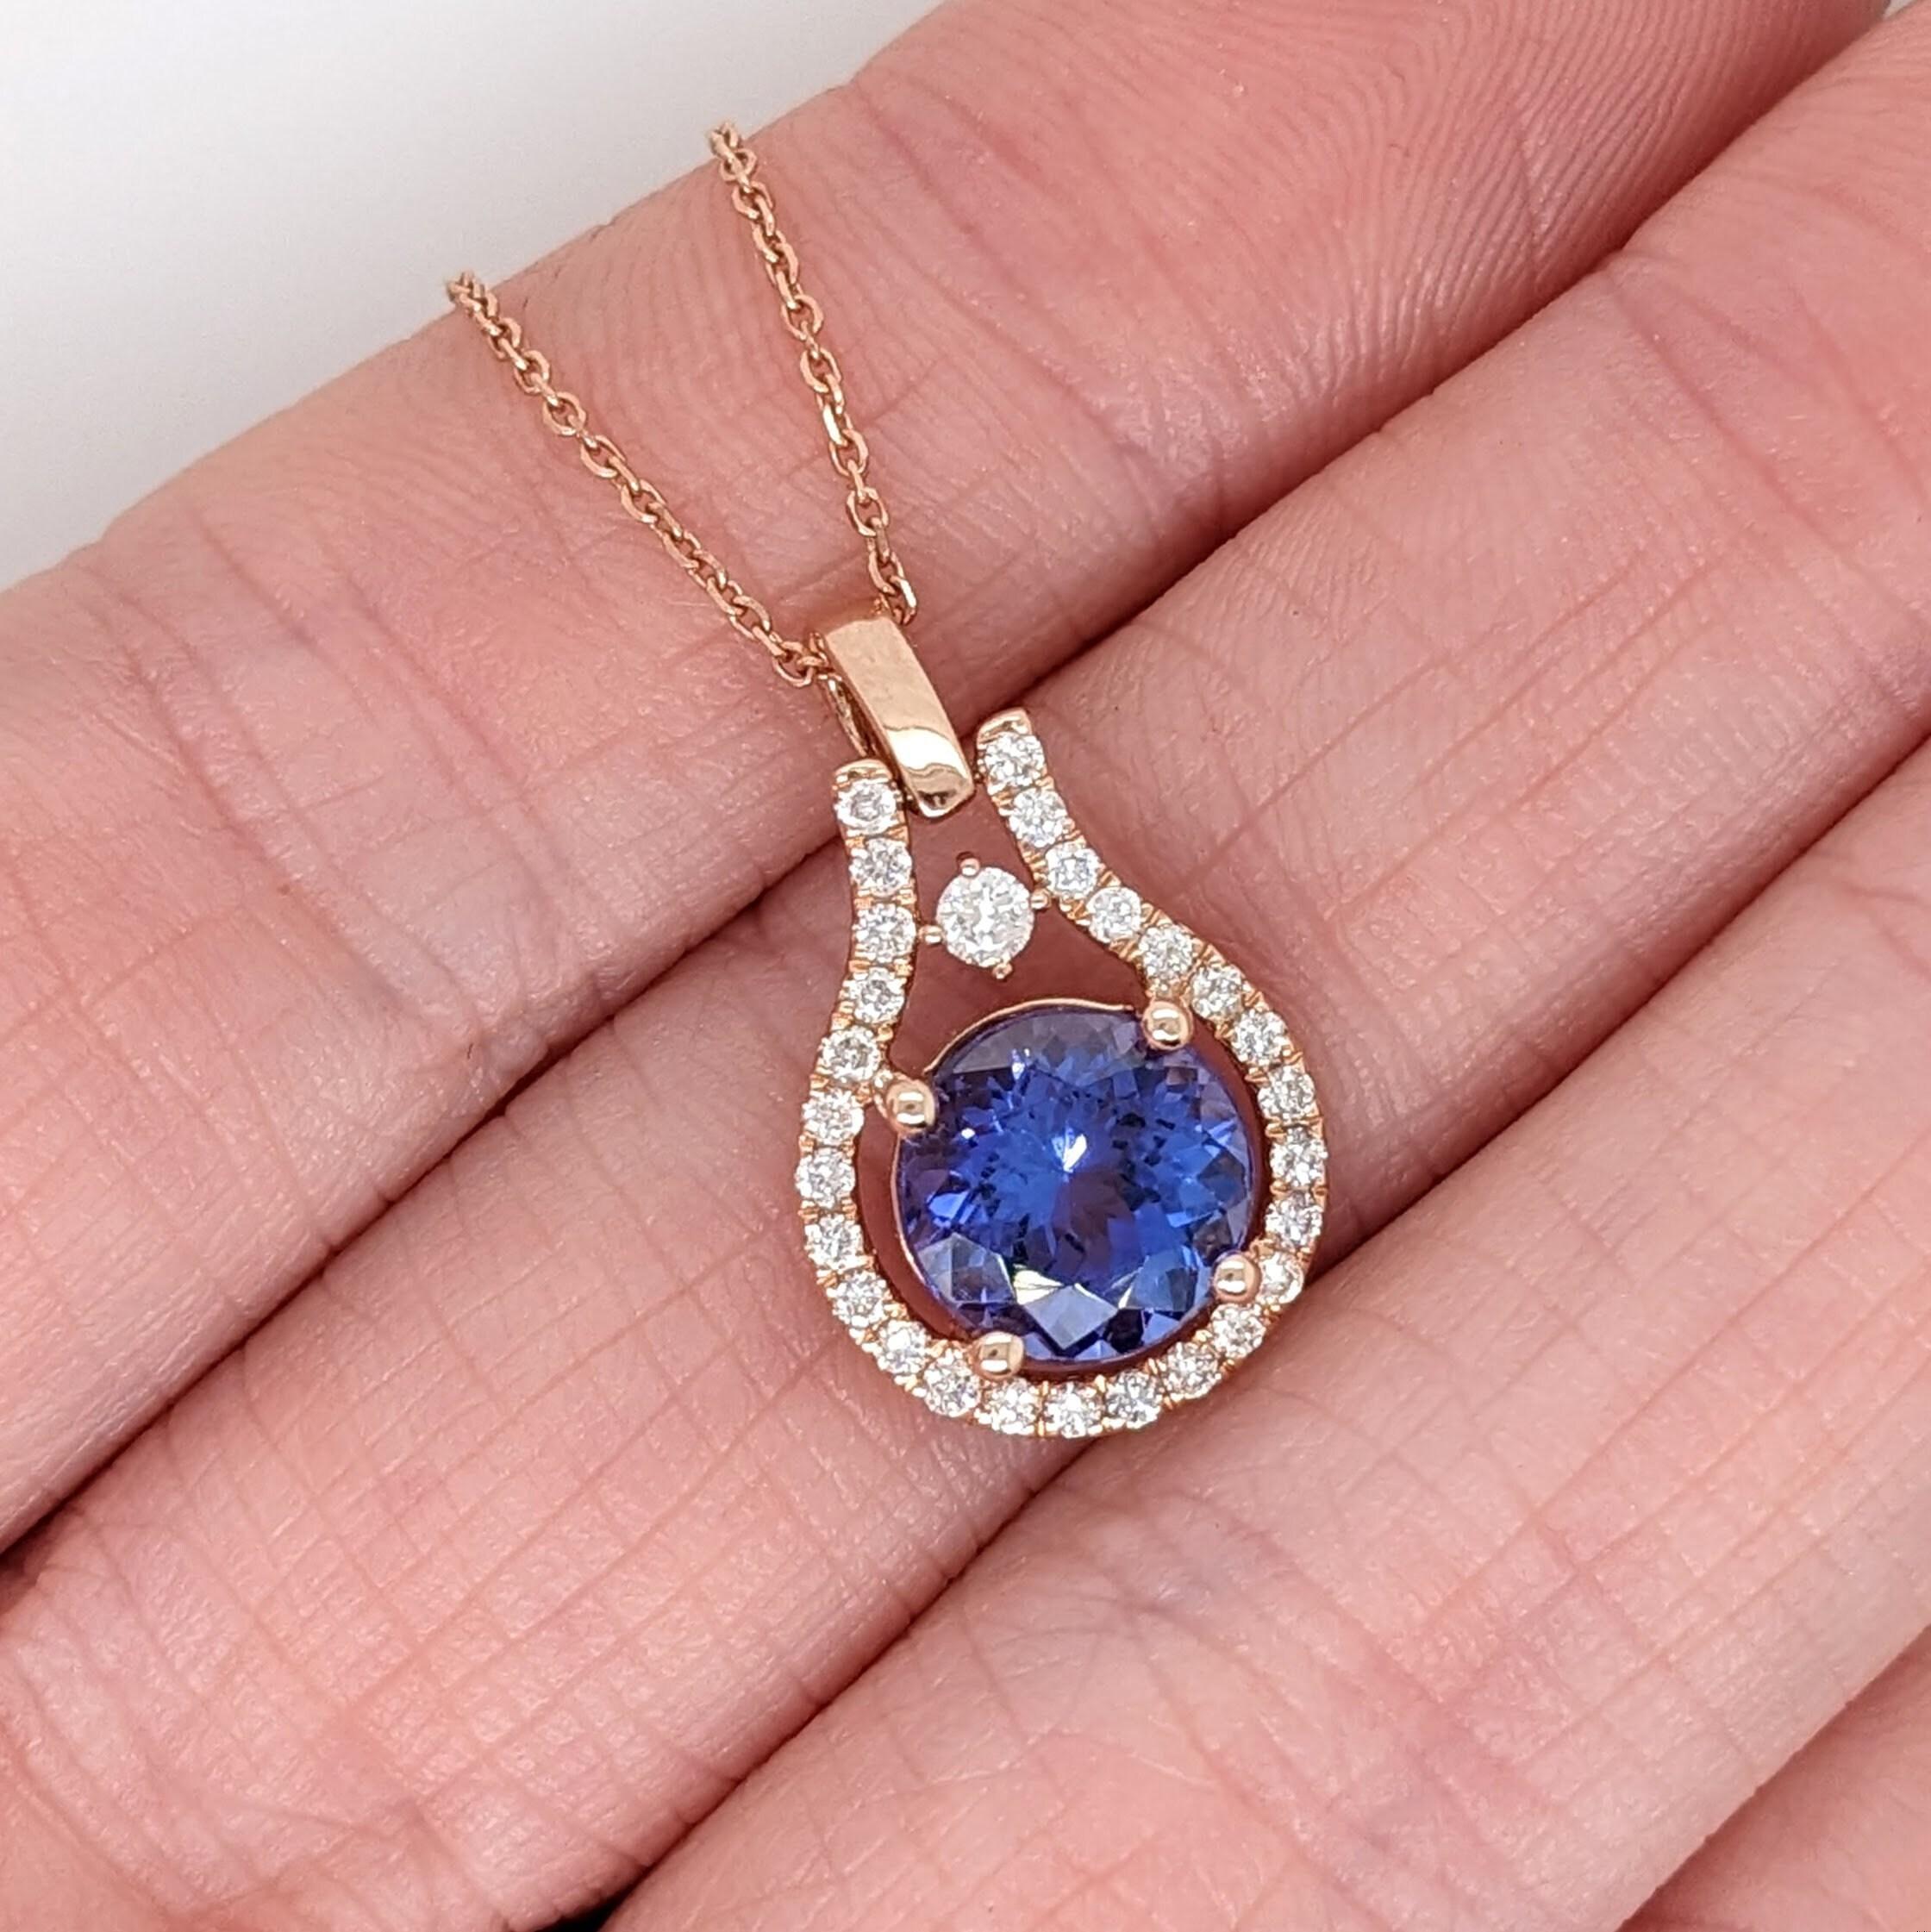 Round Cut 1.6ct Tanzanite Pendant w Earth Mined Diamonds in Solid 14K Rose Gold Round 8mm